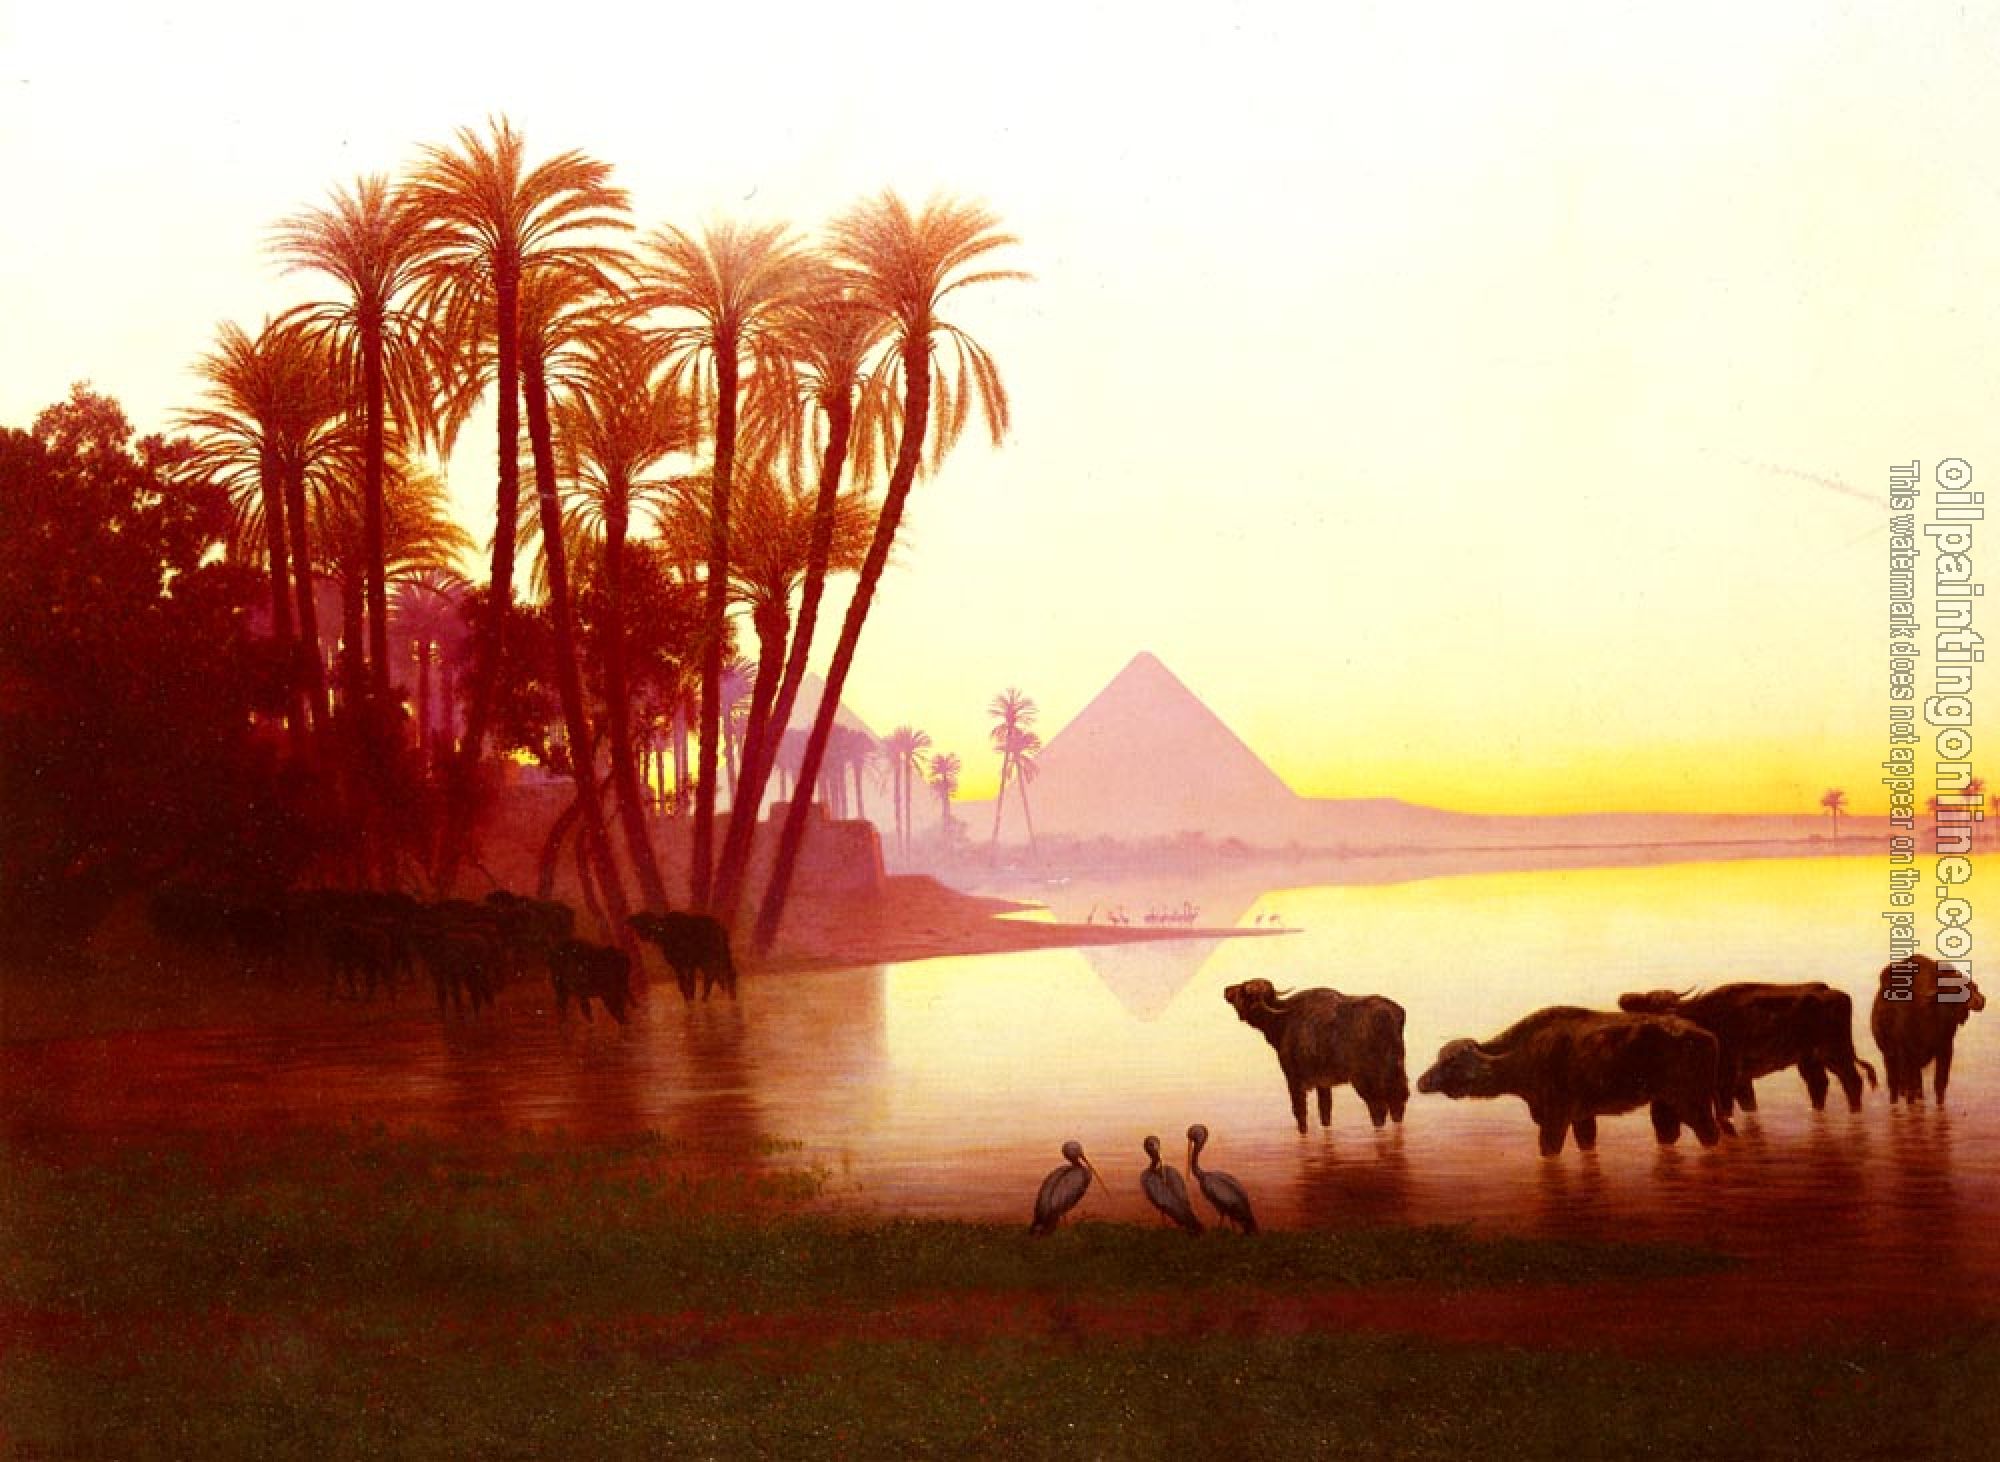 Frere, Charles Theodore - Along The Nile